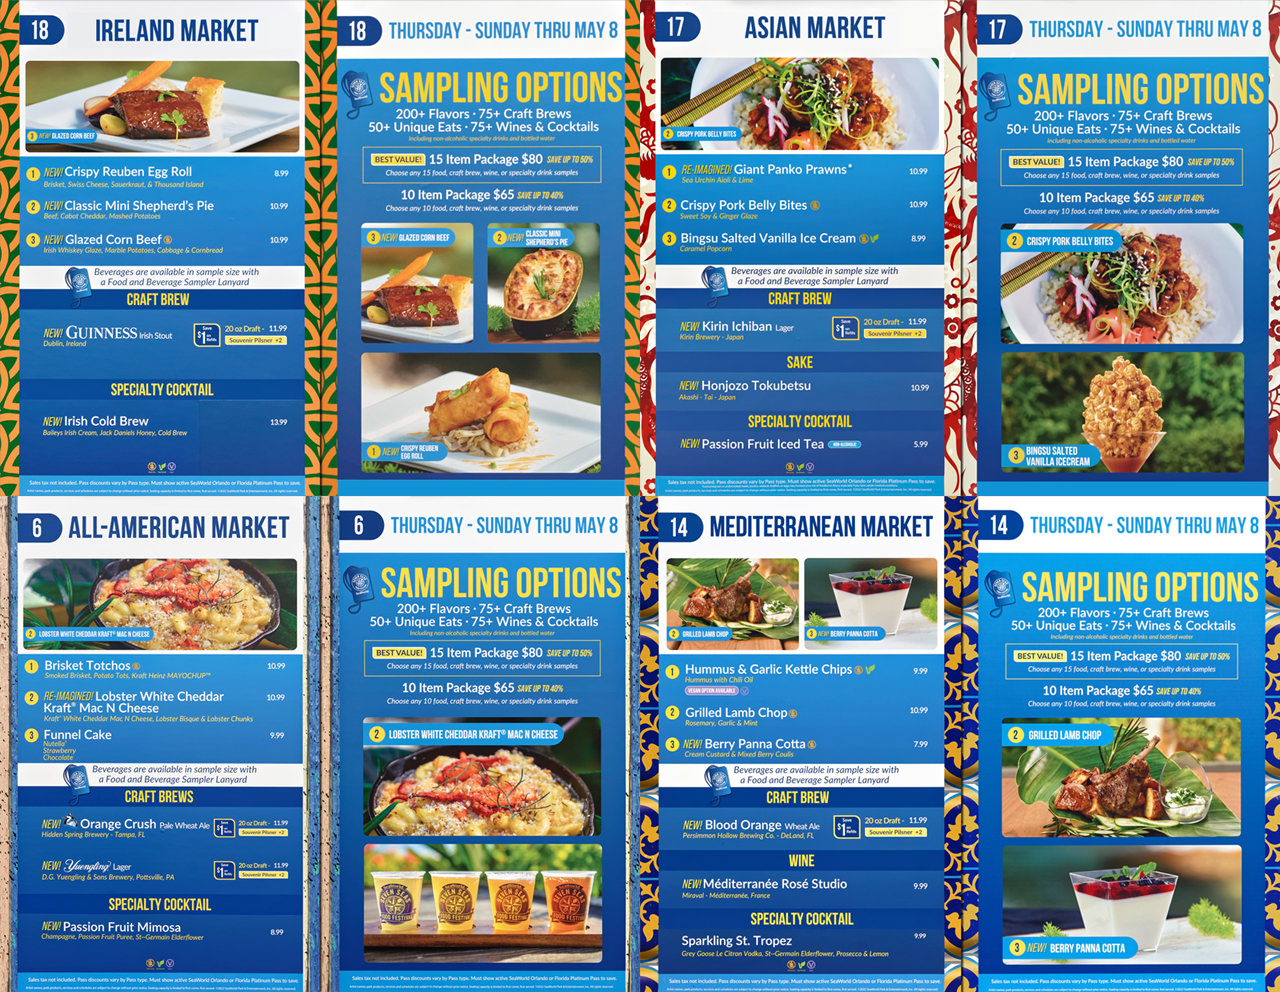 Photos from Menu Boards and Prices for the 2022 Seven Seas Food